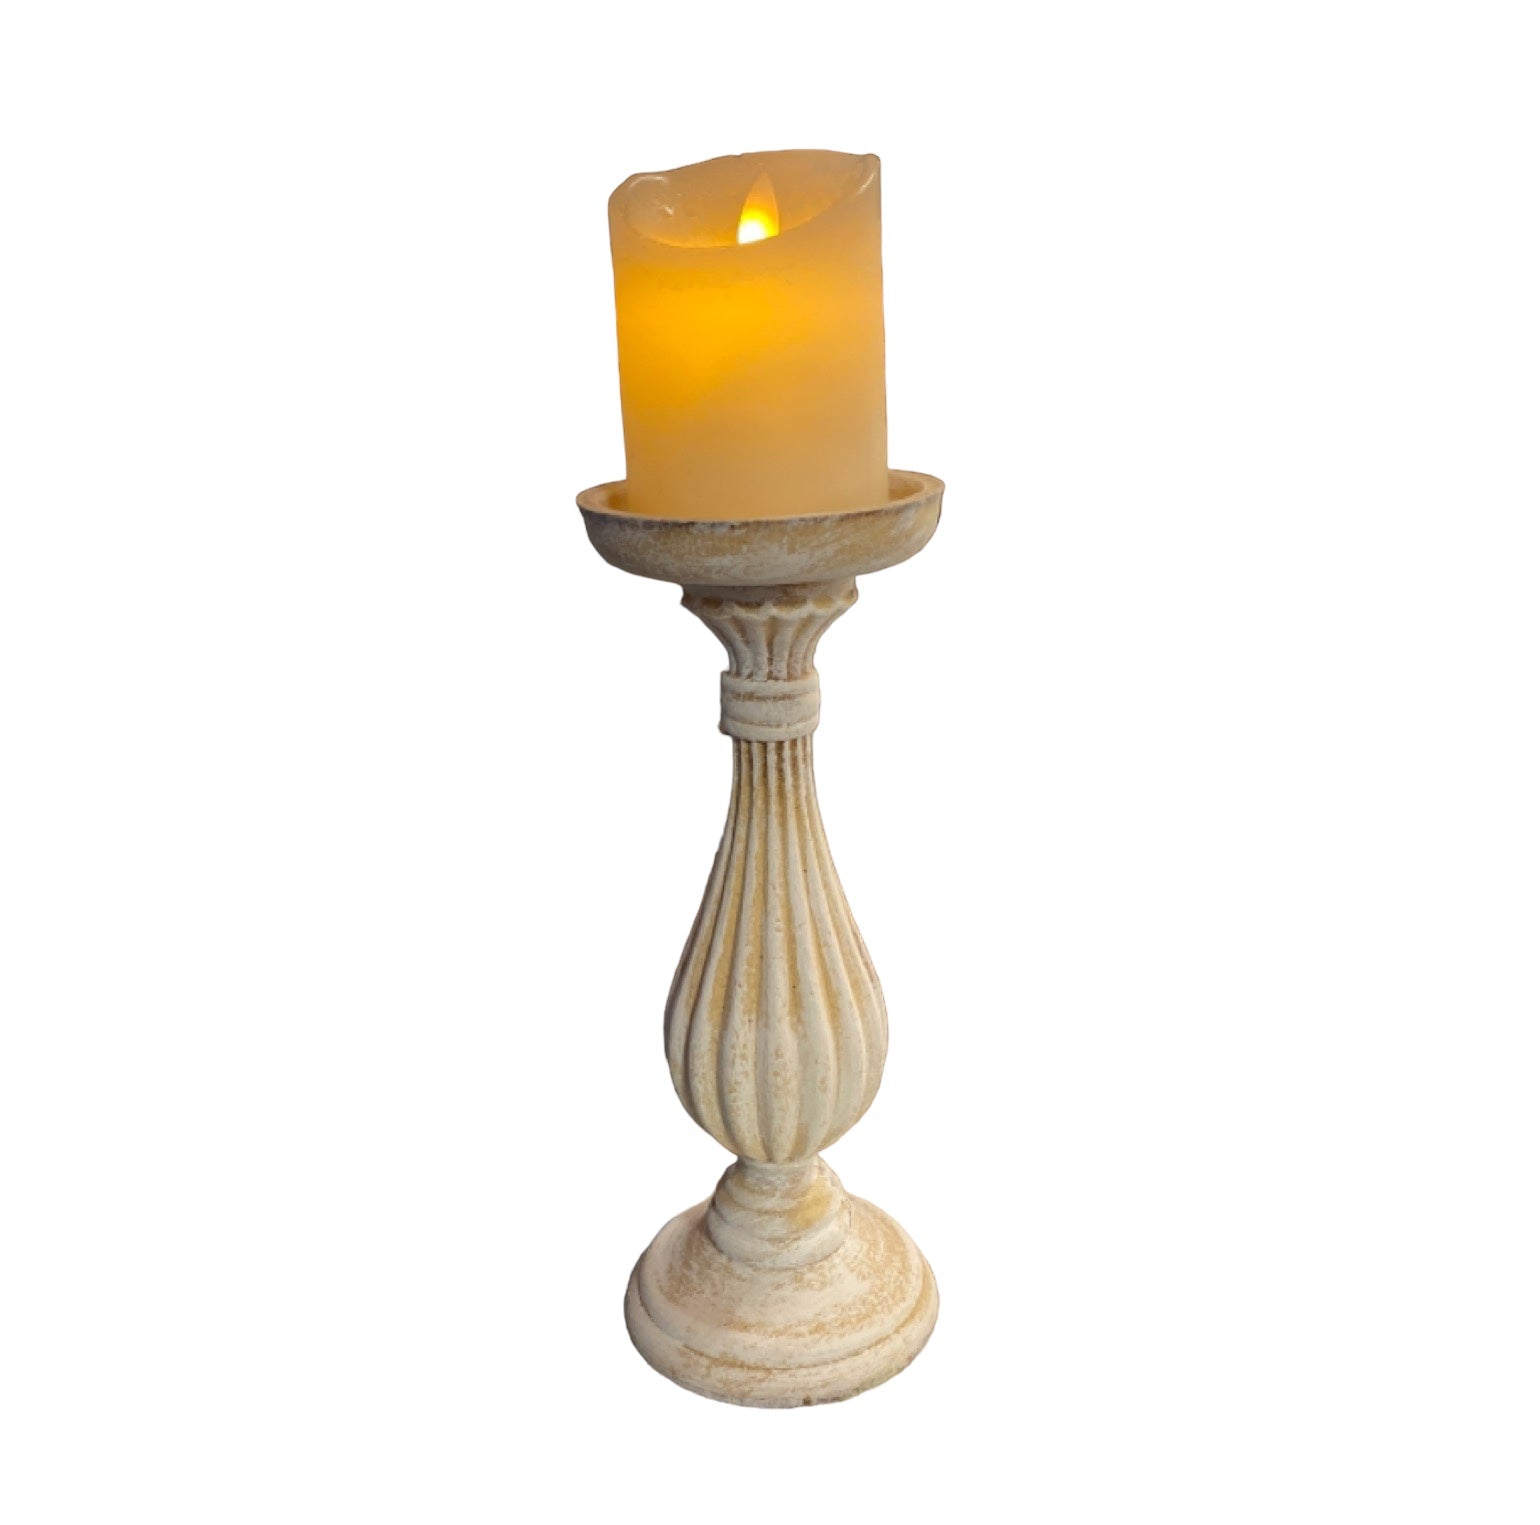 Candle Holder Vintage White - The Renmy Store Homewares & Gifts 